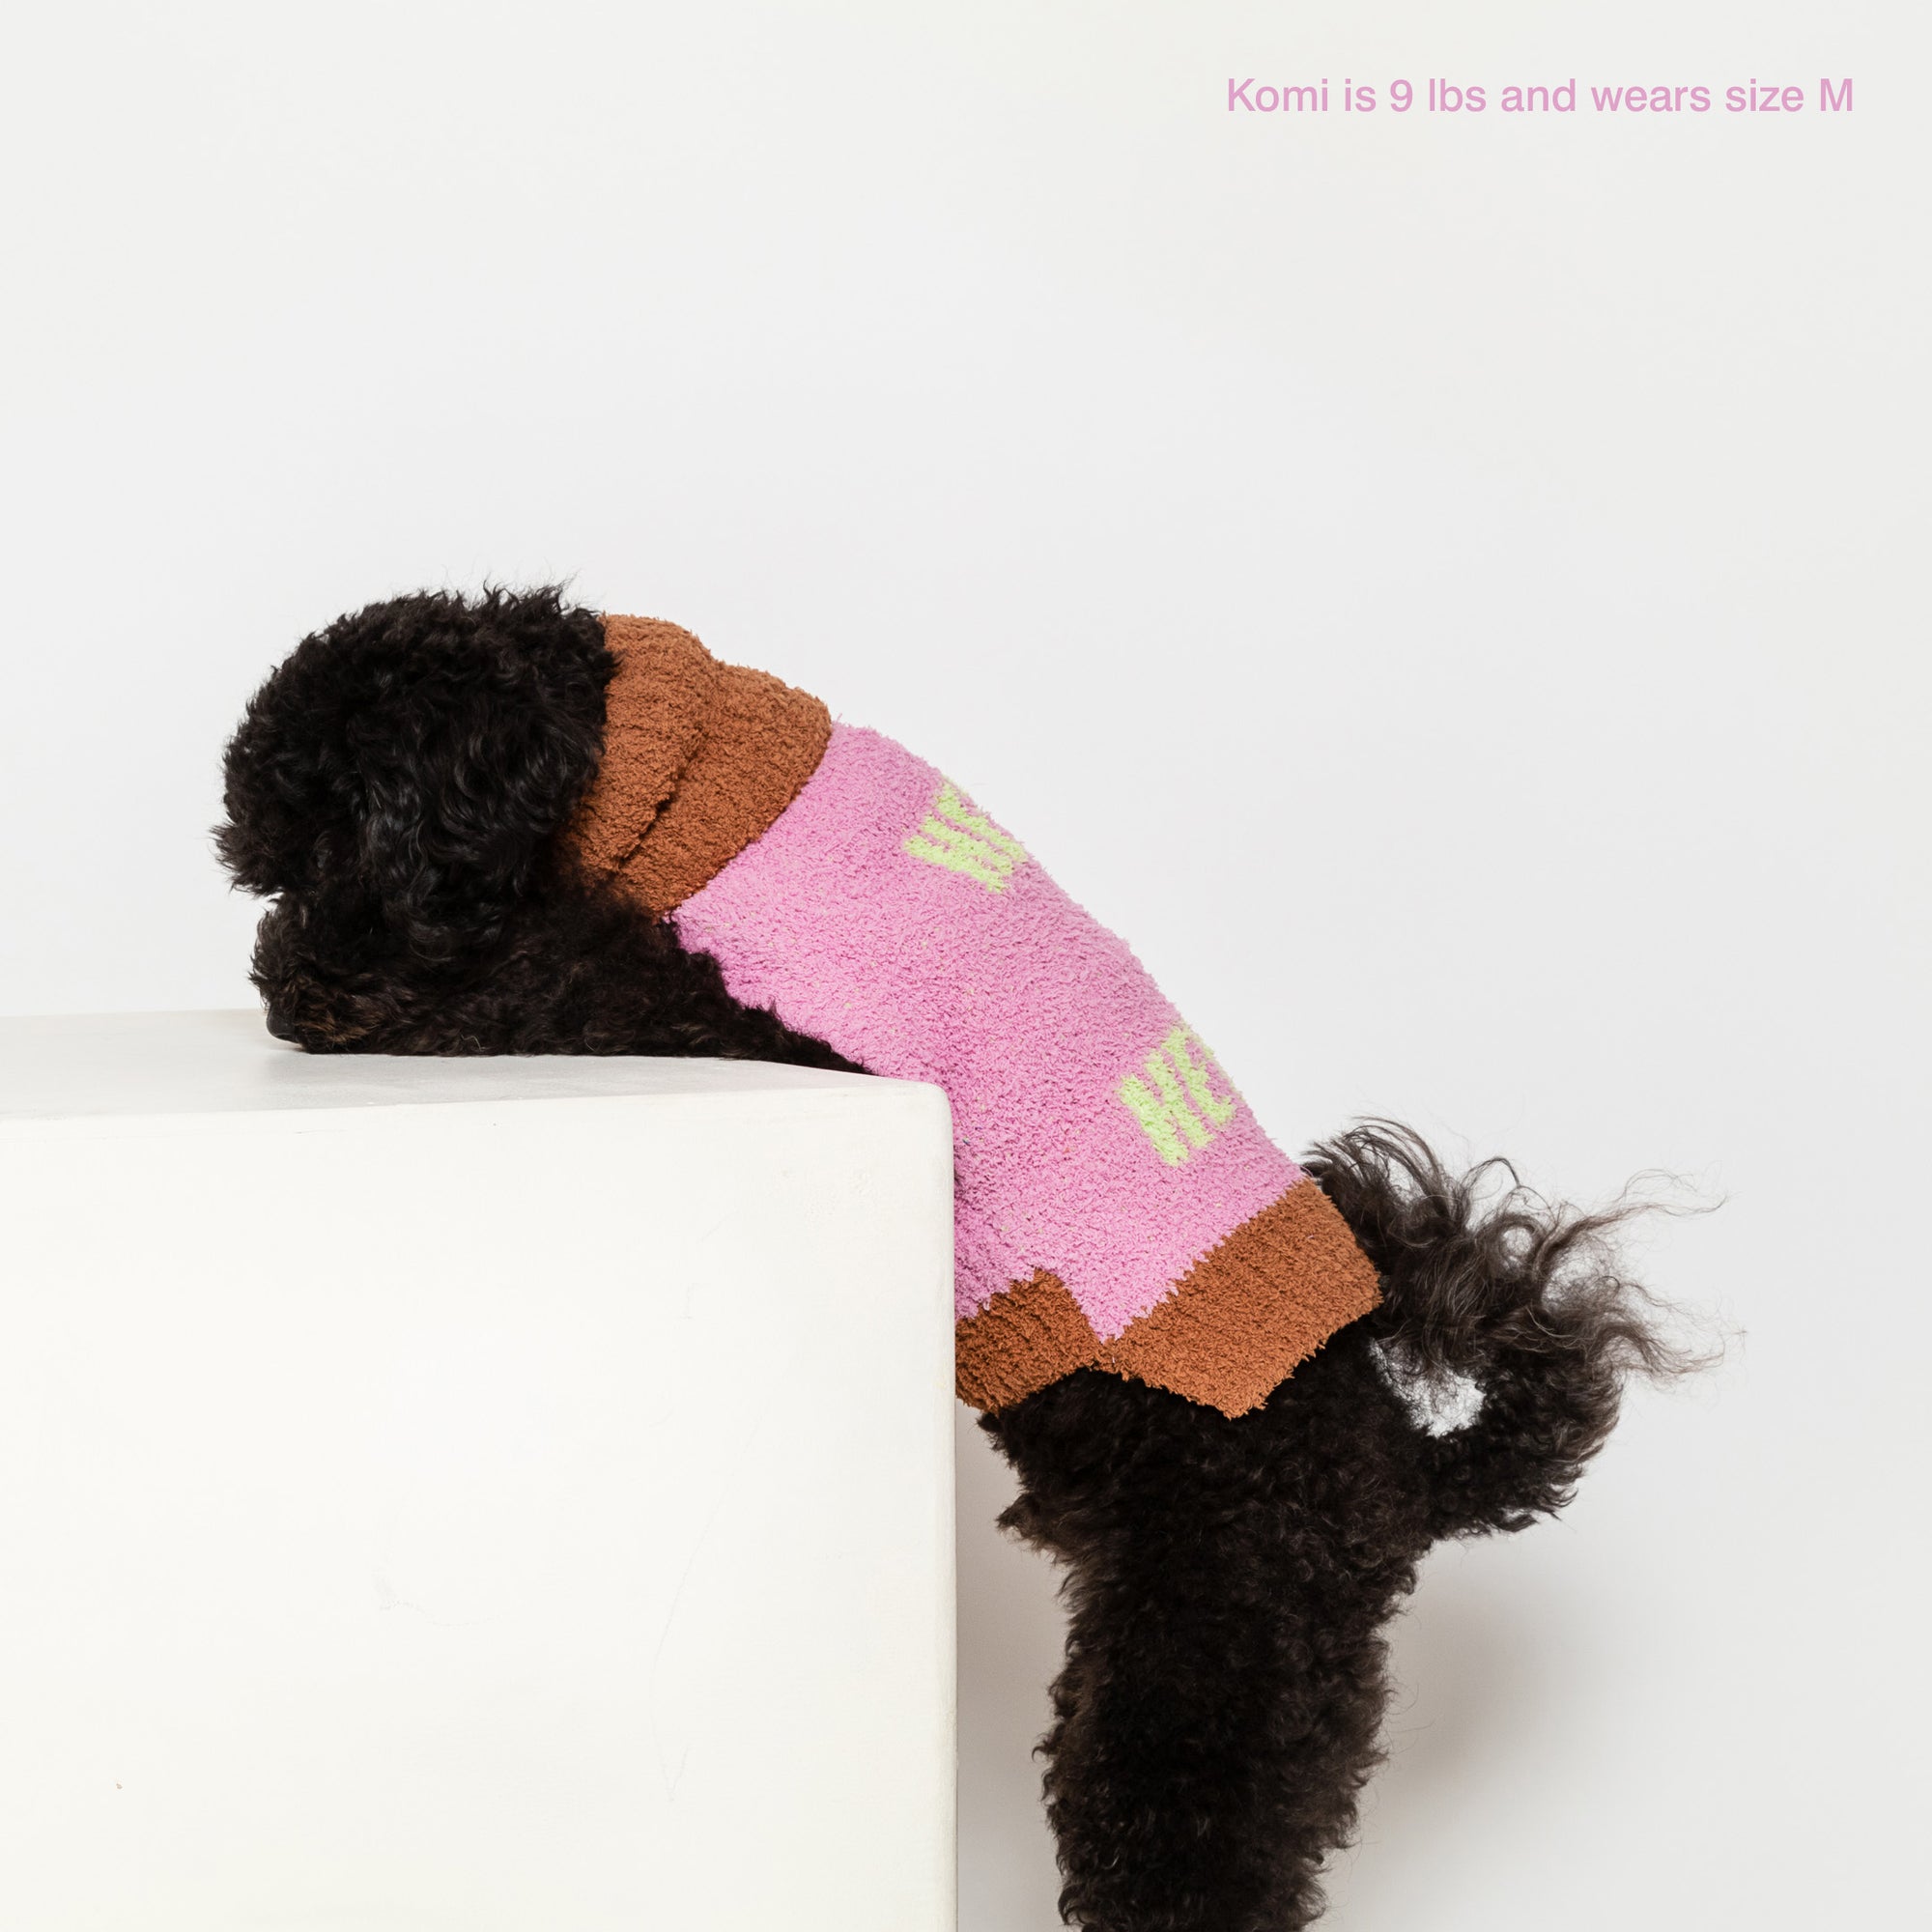 Poodle named Komi, 9Lb in a medium "The Furryfolks" Hey sweater, draped over a cube, against a white backdrop.